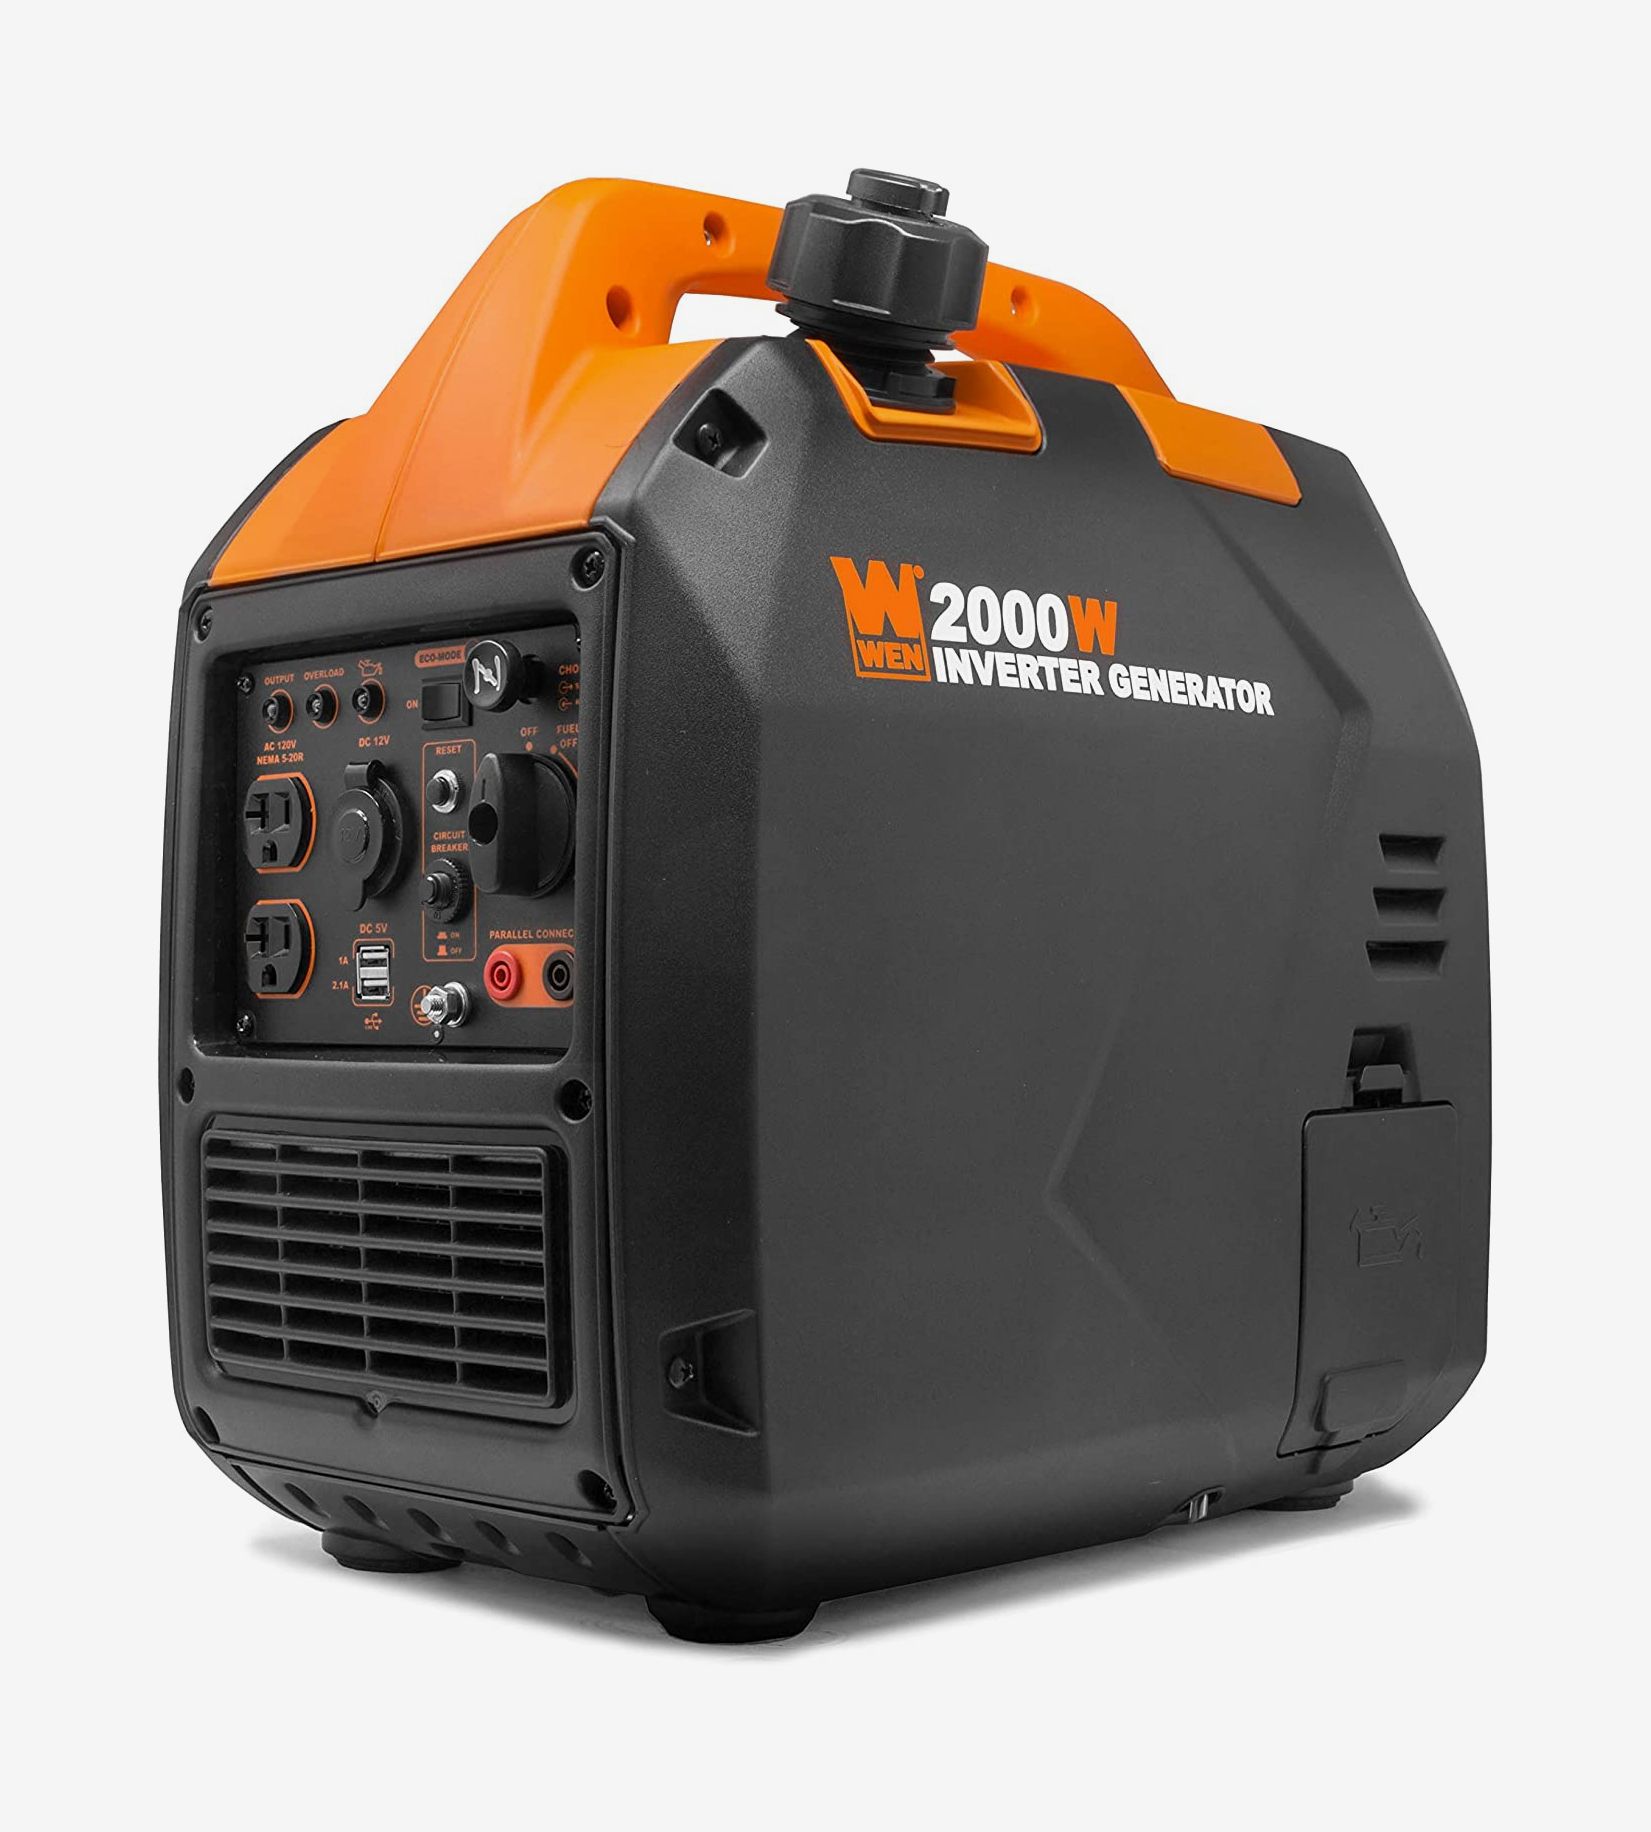 Look at these 10 best portable generators for home use that Shelf Guide has  found and revie… in 2021 - Best portable generator, Portable generators,  Generators for home use